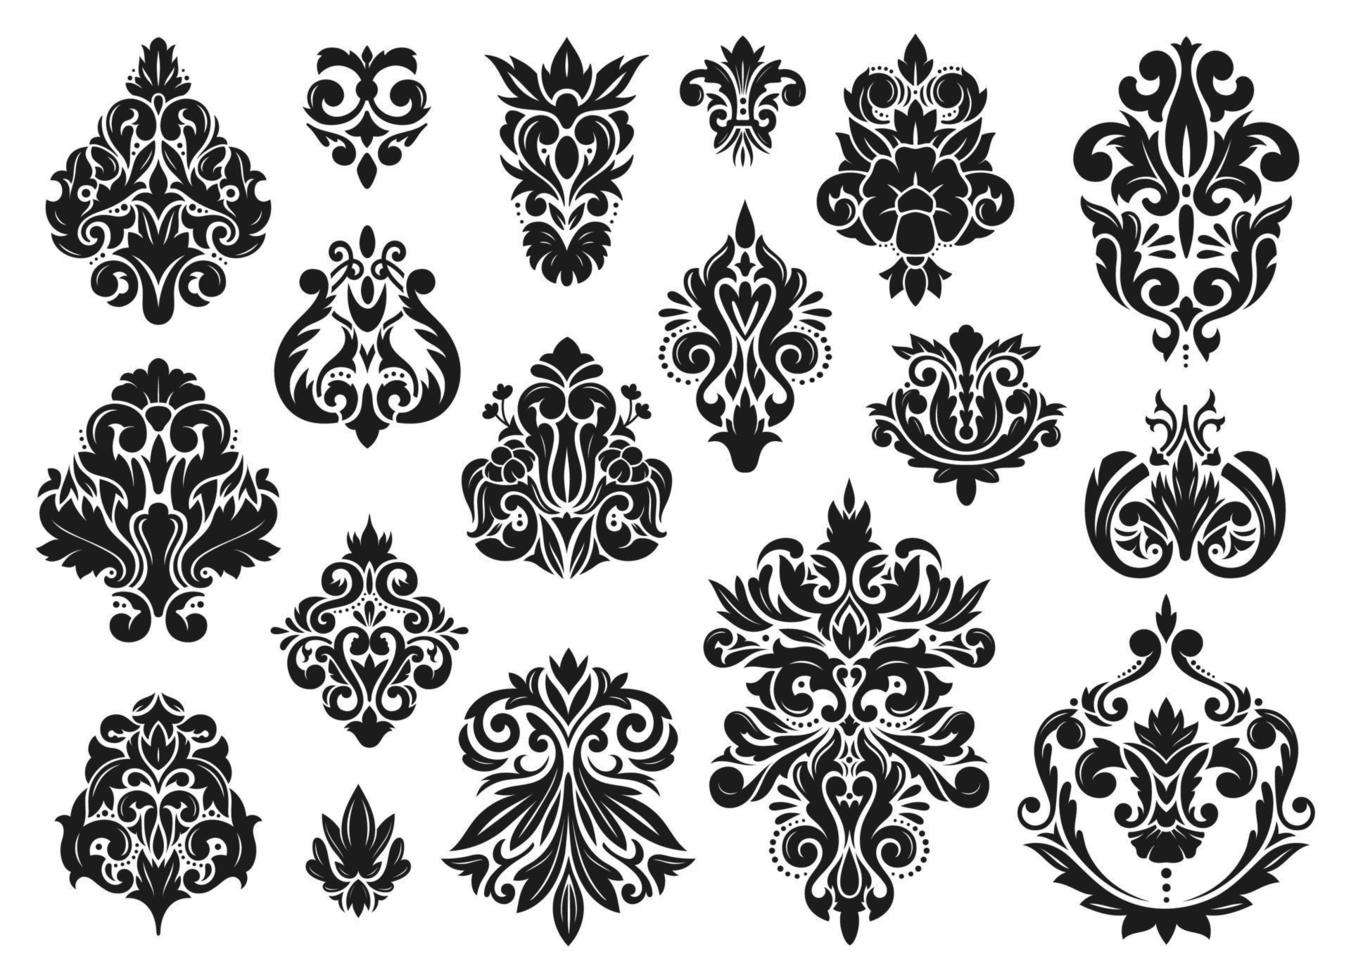 Damask ornaments. Vintage baroque style ornament with floral elements. Classic filigree decorations, old fashioned victorian decor vector set